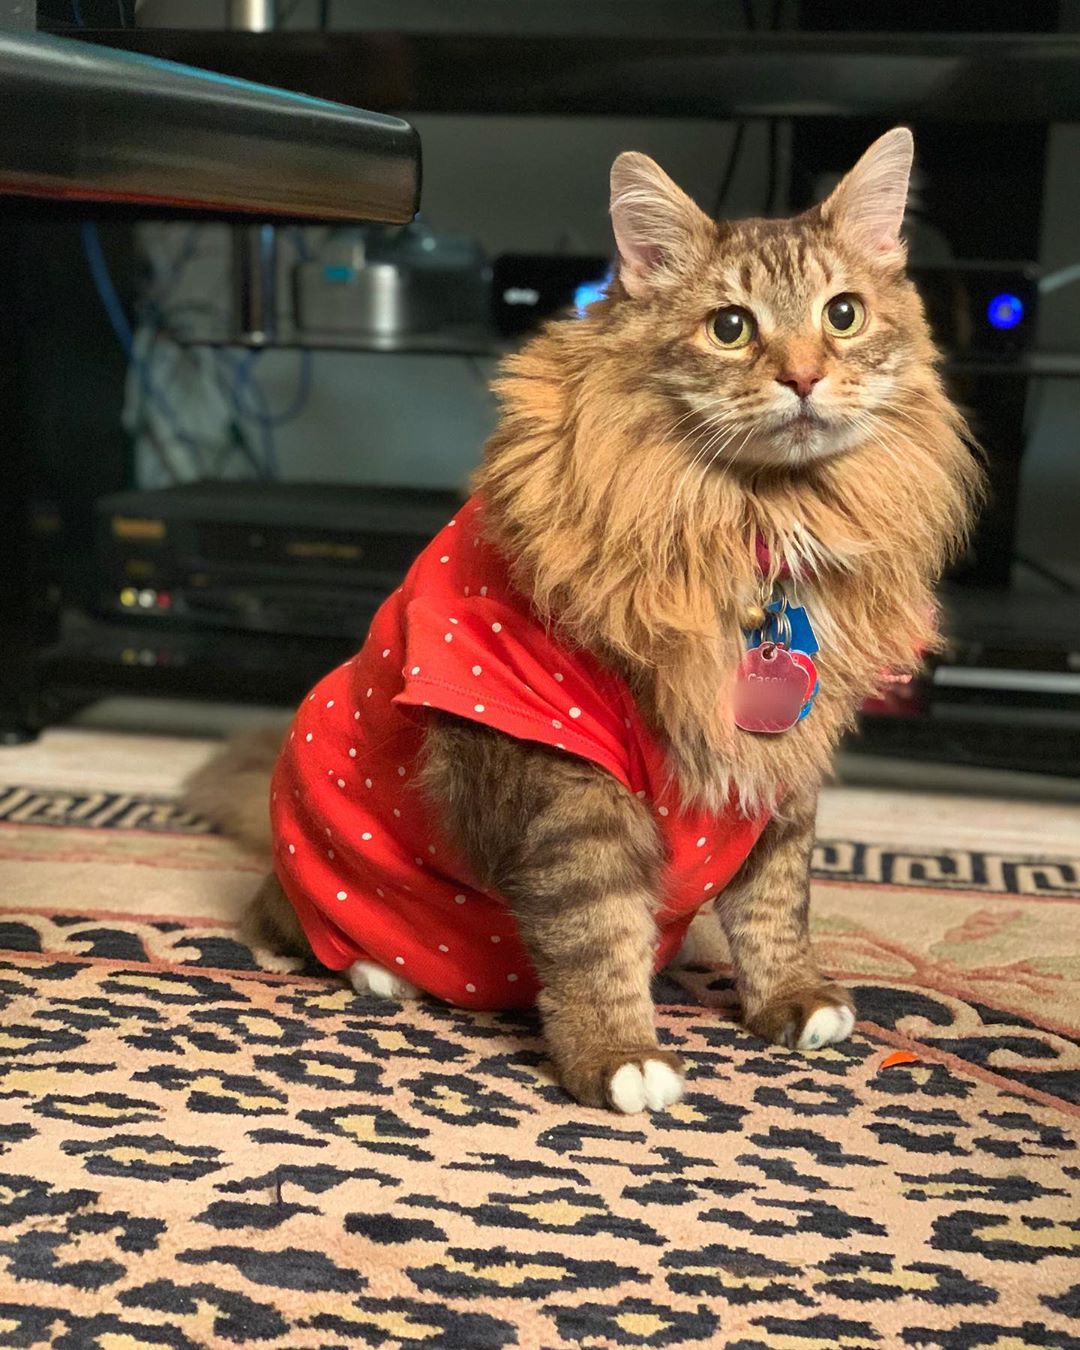 Maine Coon Cat wearing a red shirt with polka dots sitting on the floor